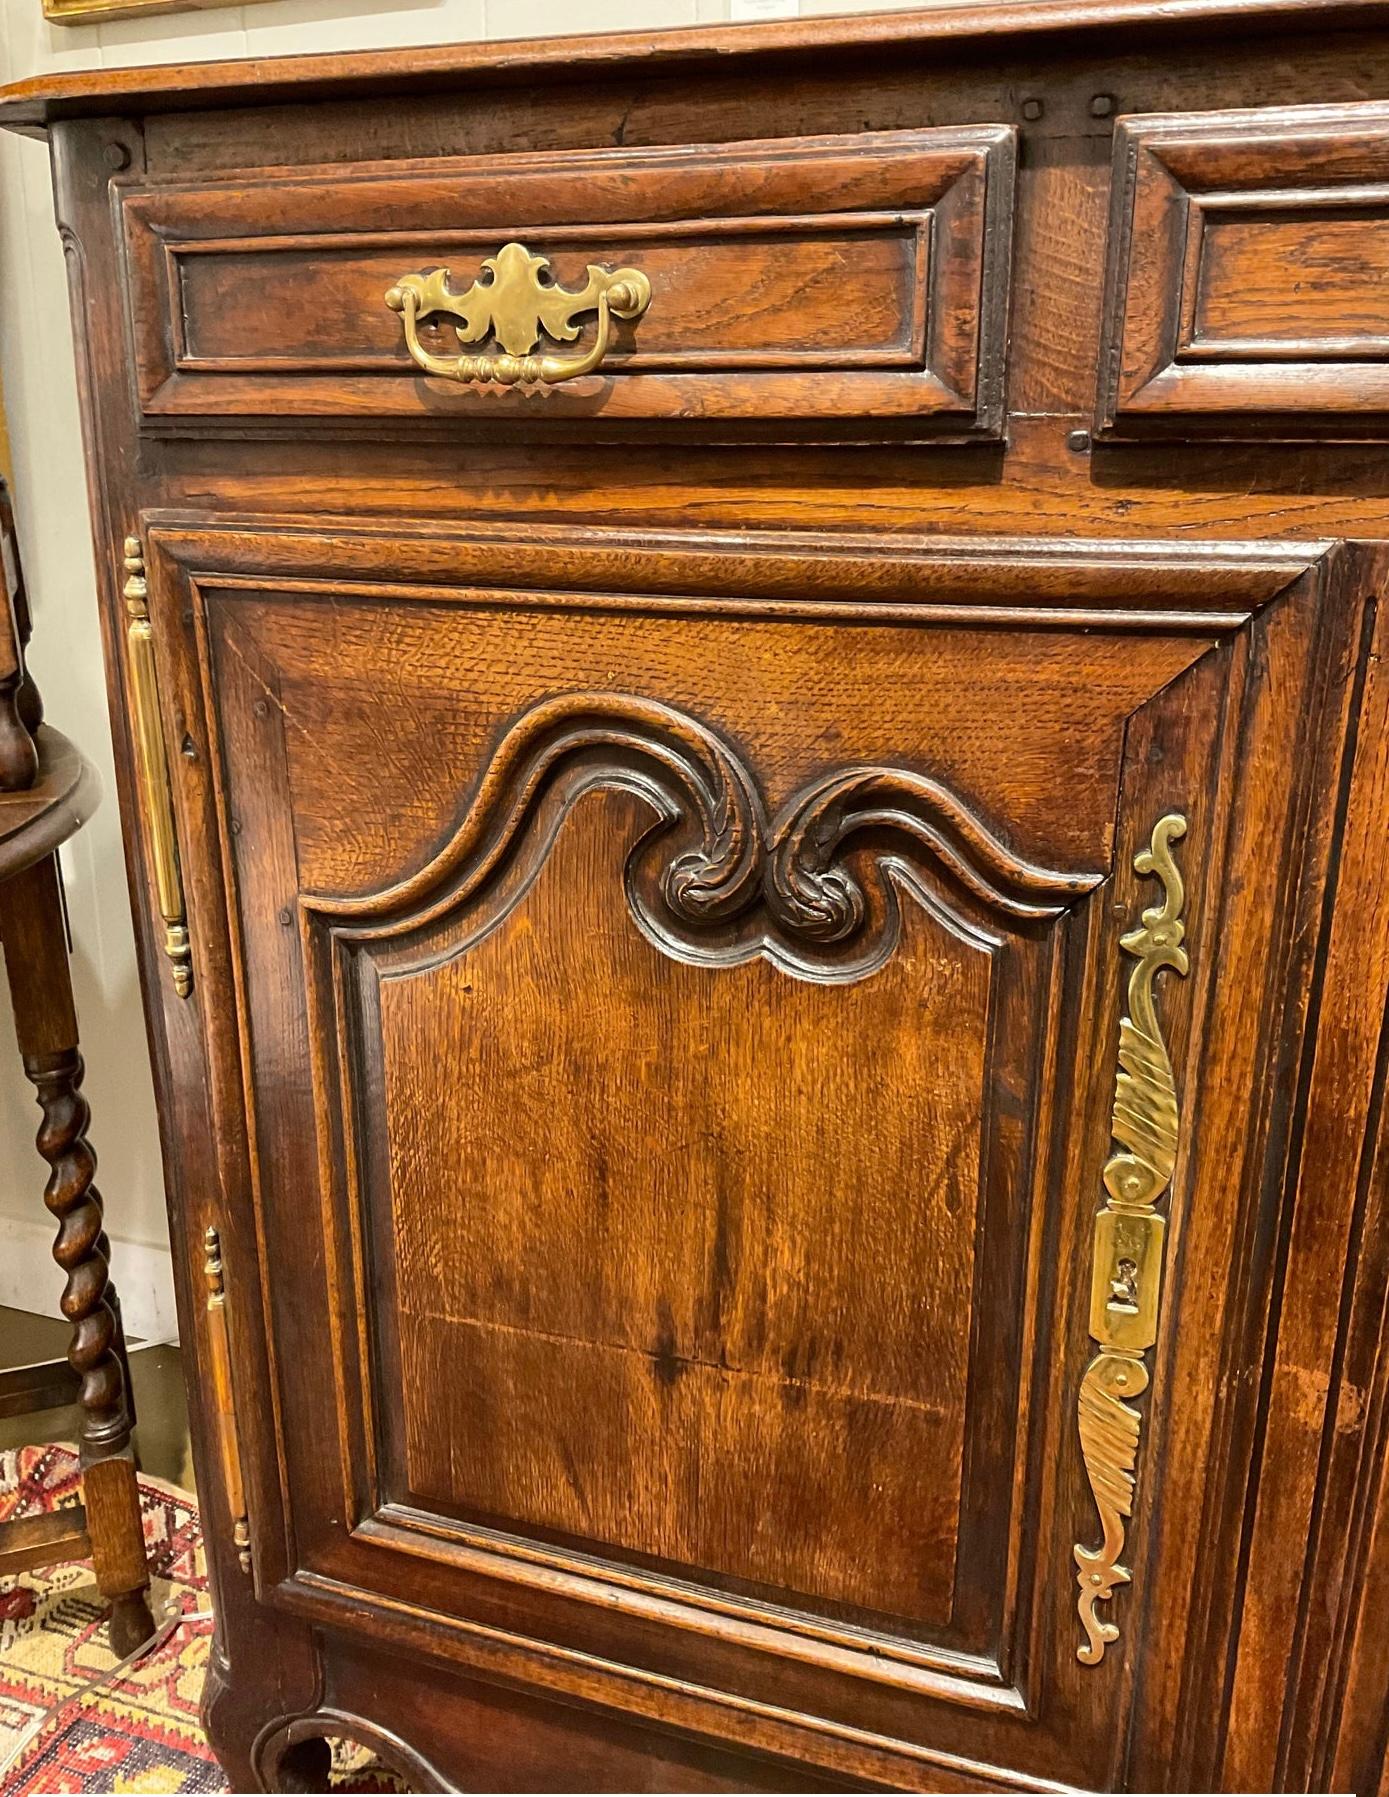 This is a gorgeous 19th century French Server! This piece has an old-world style with dark, glossy wood and ornate gold hinges, pulls and keyholes, as well as a curved, carved design on the bottom of the piece.